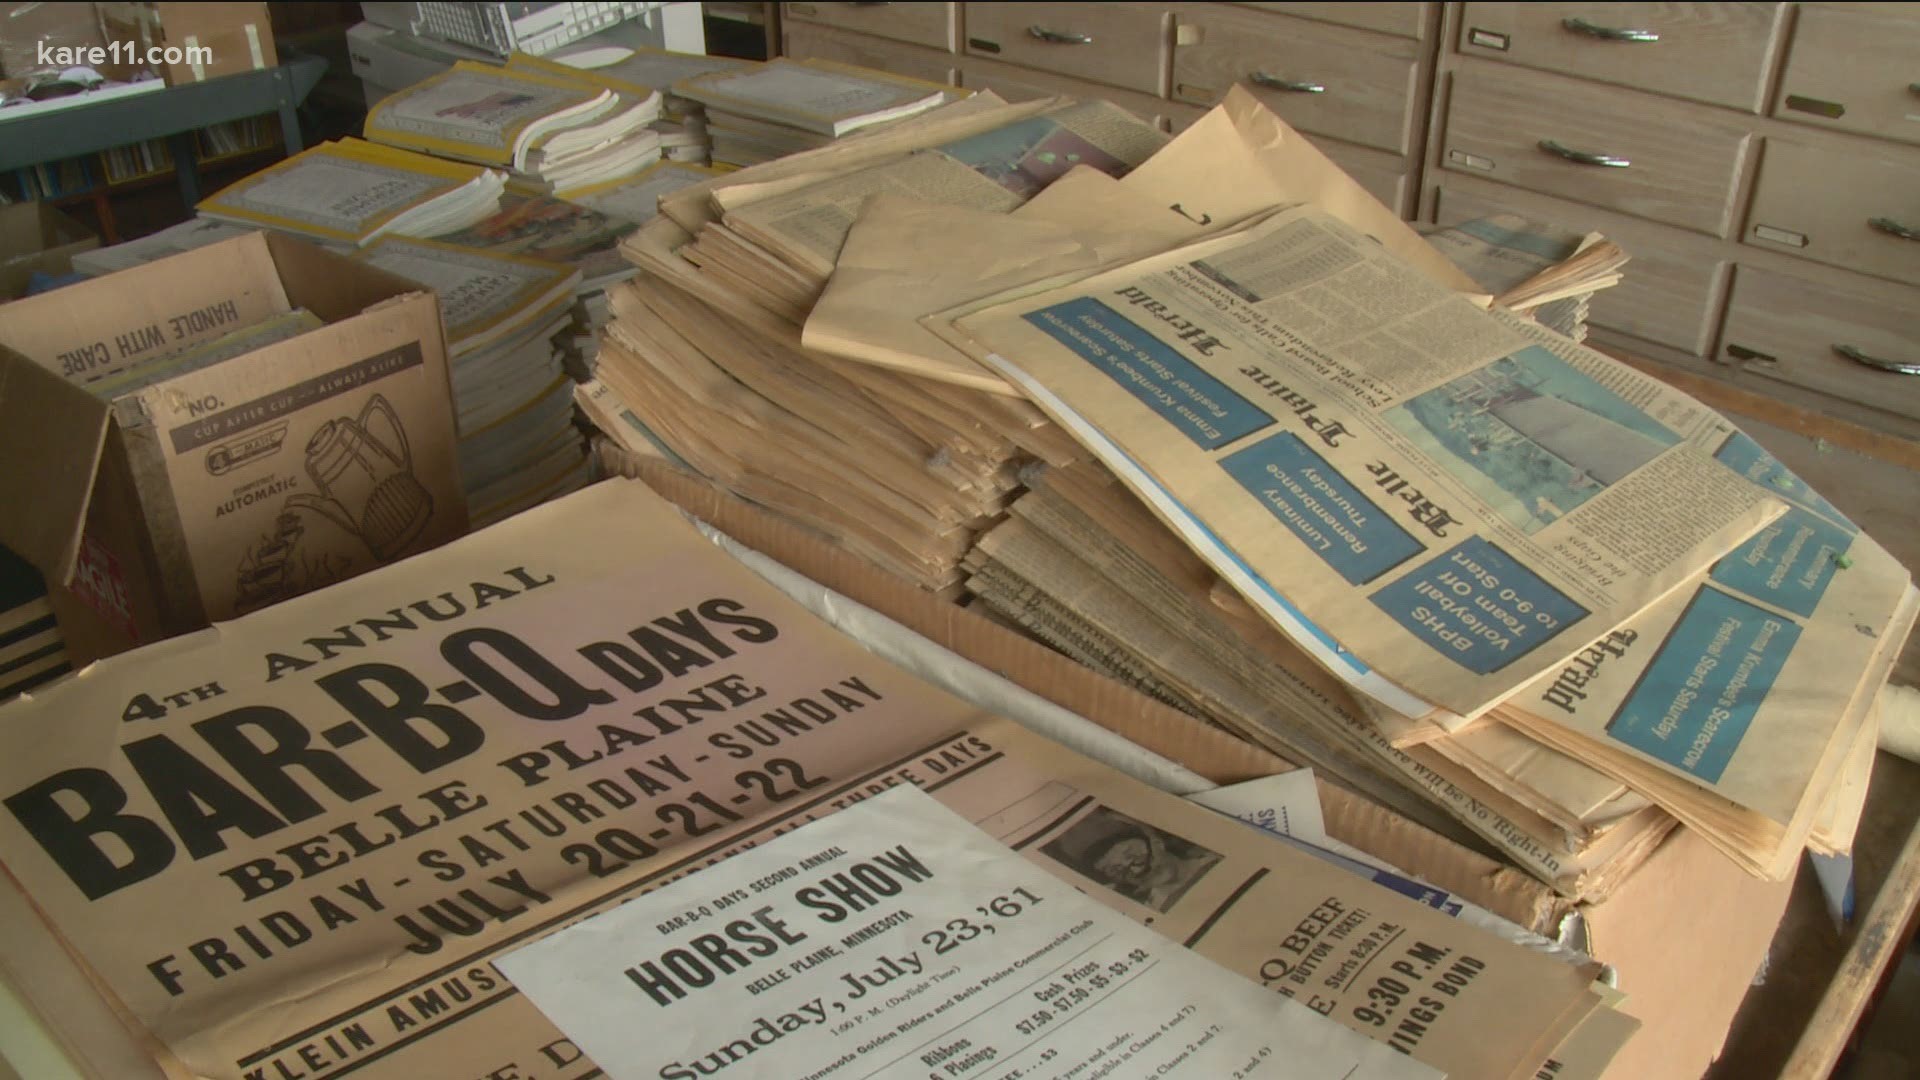 Learn how Minnesota's oldest family-owned newspaper is preserving community history by sharing the news from a bygone era.